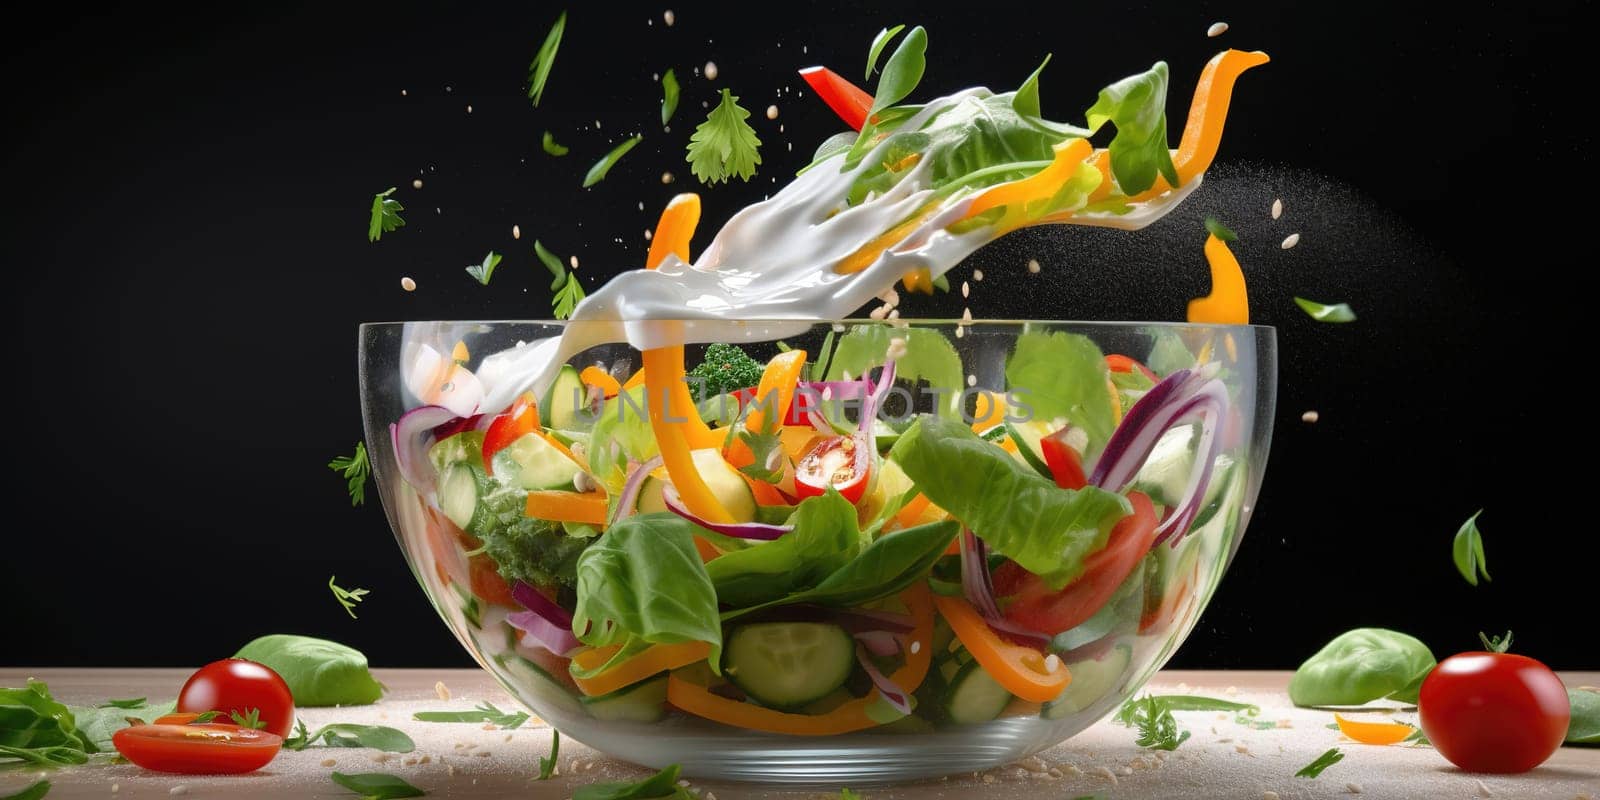 Salad falling into a glass bowl, mess on the table, black background